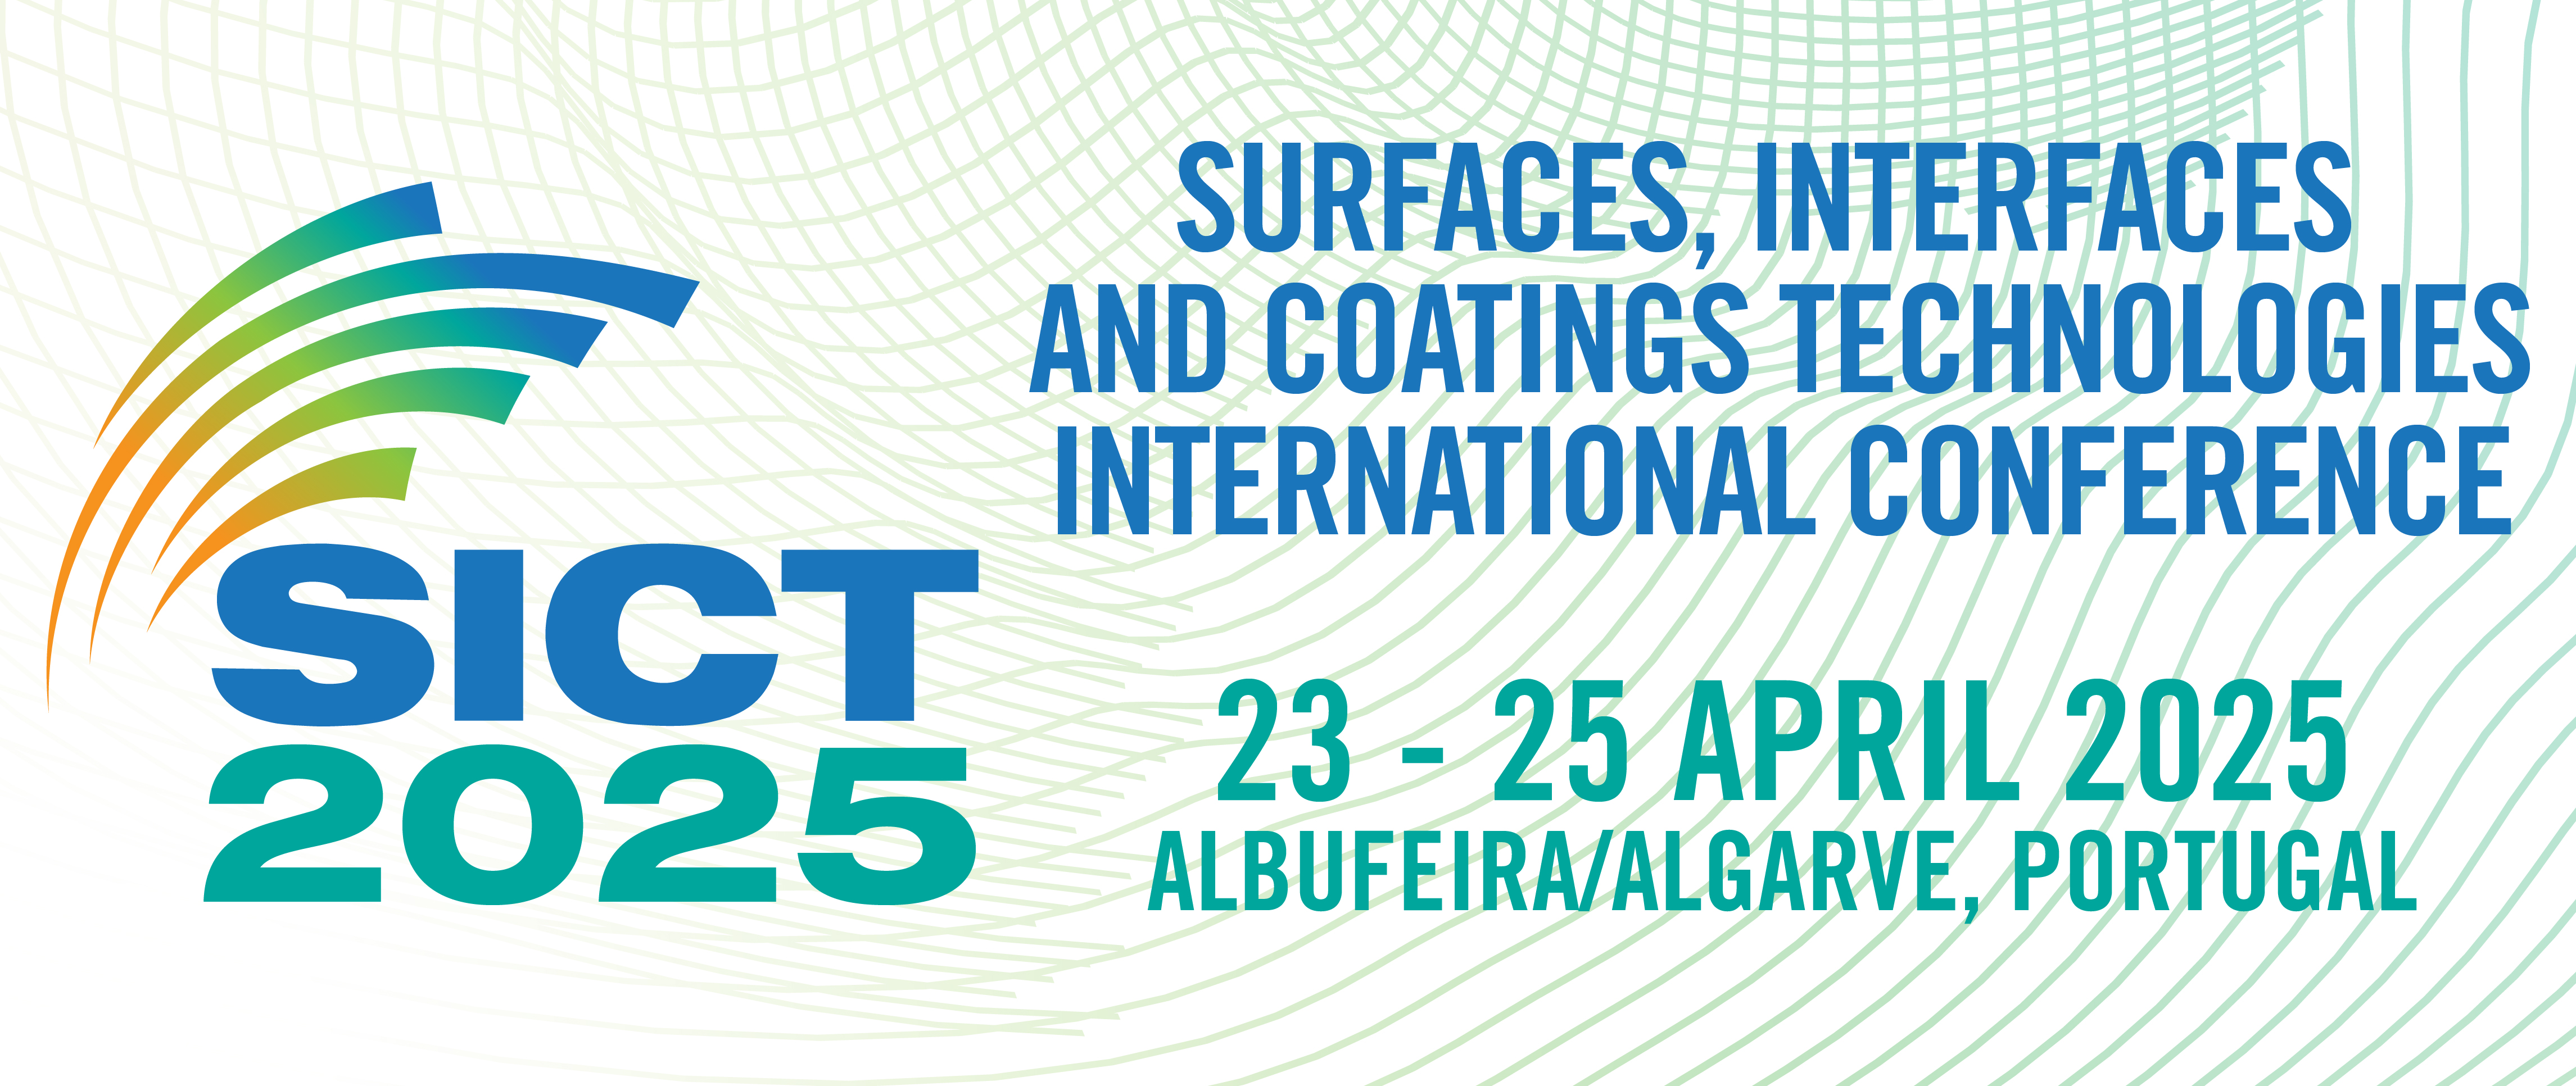 Surfaces, Interfaces and Coatings Technologies International conference - SICT 2025